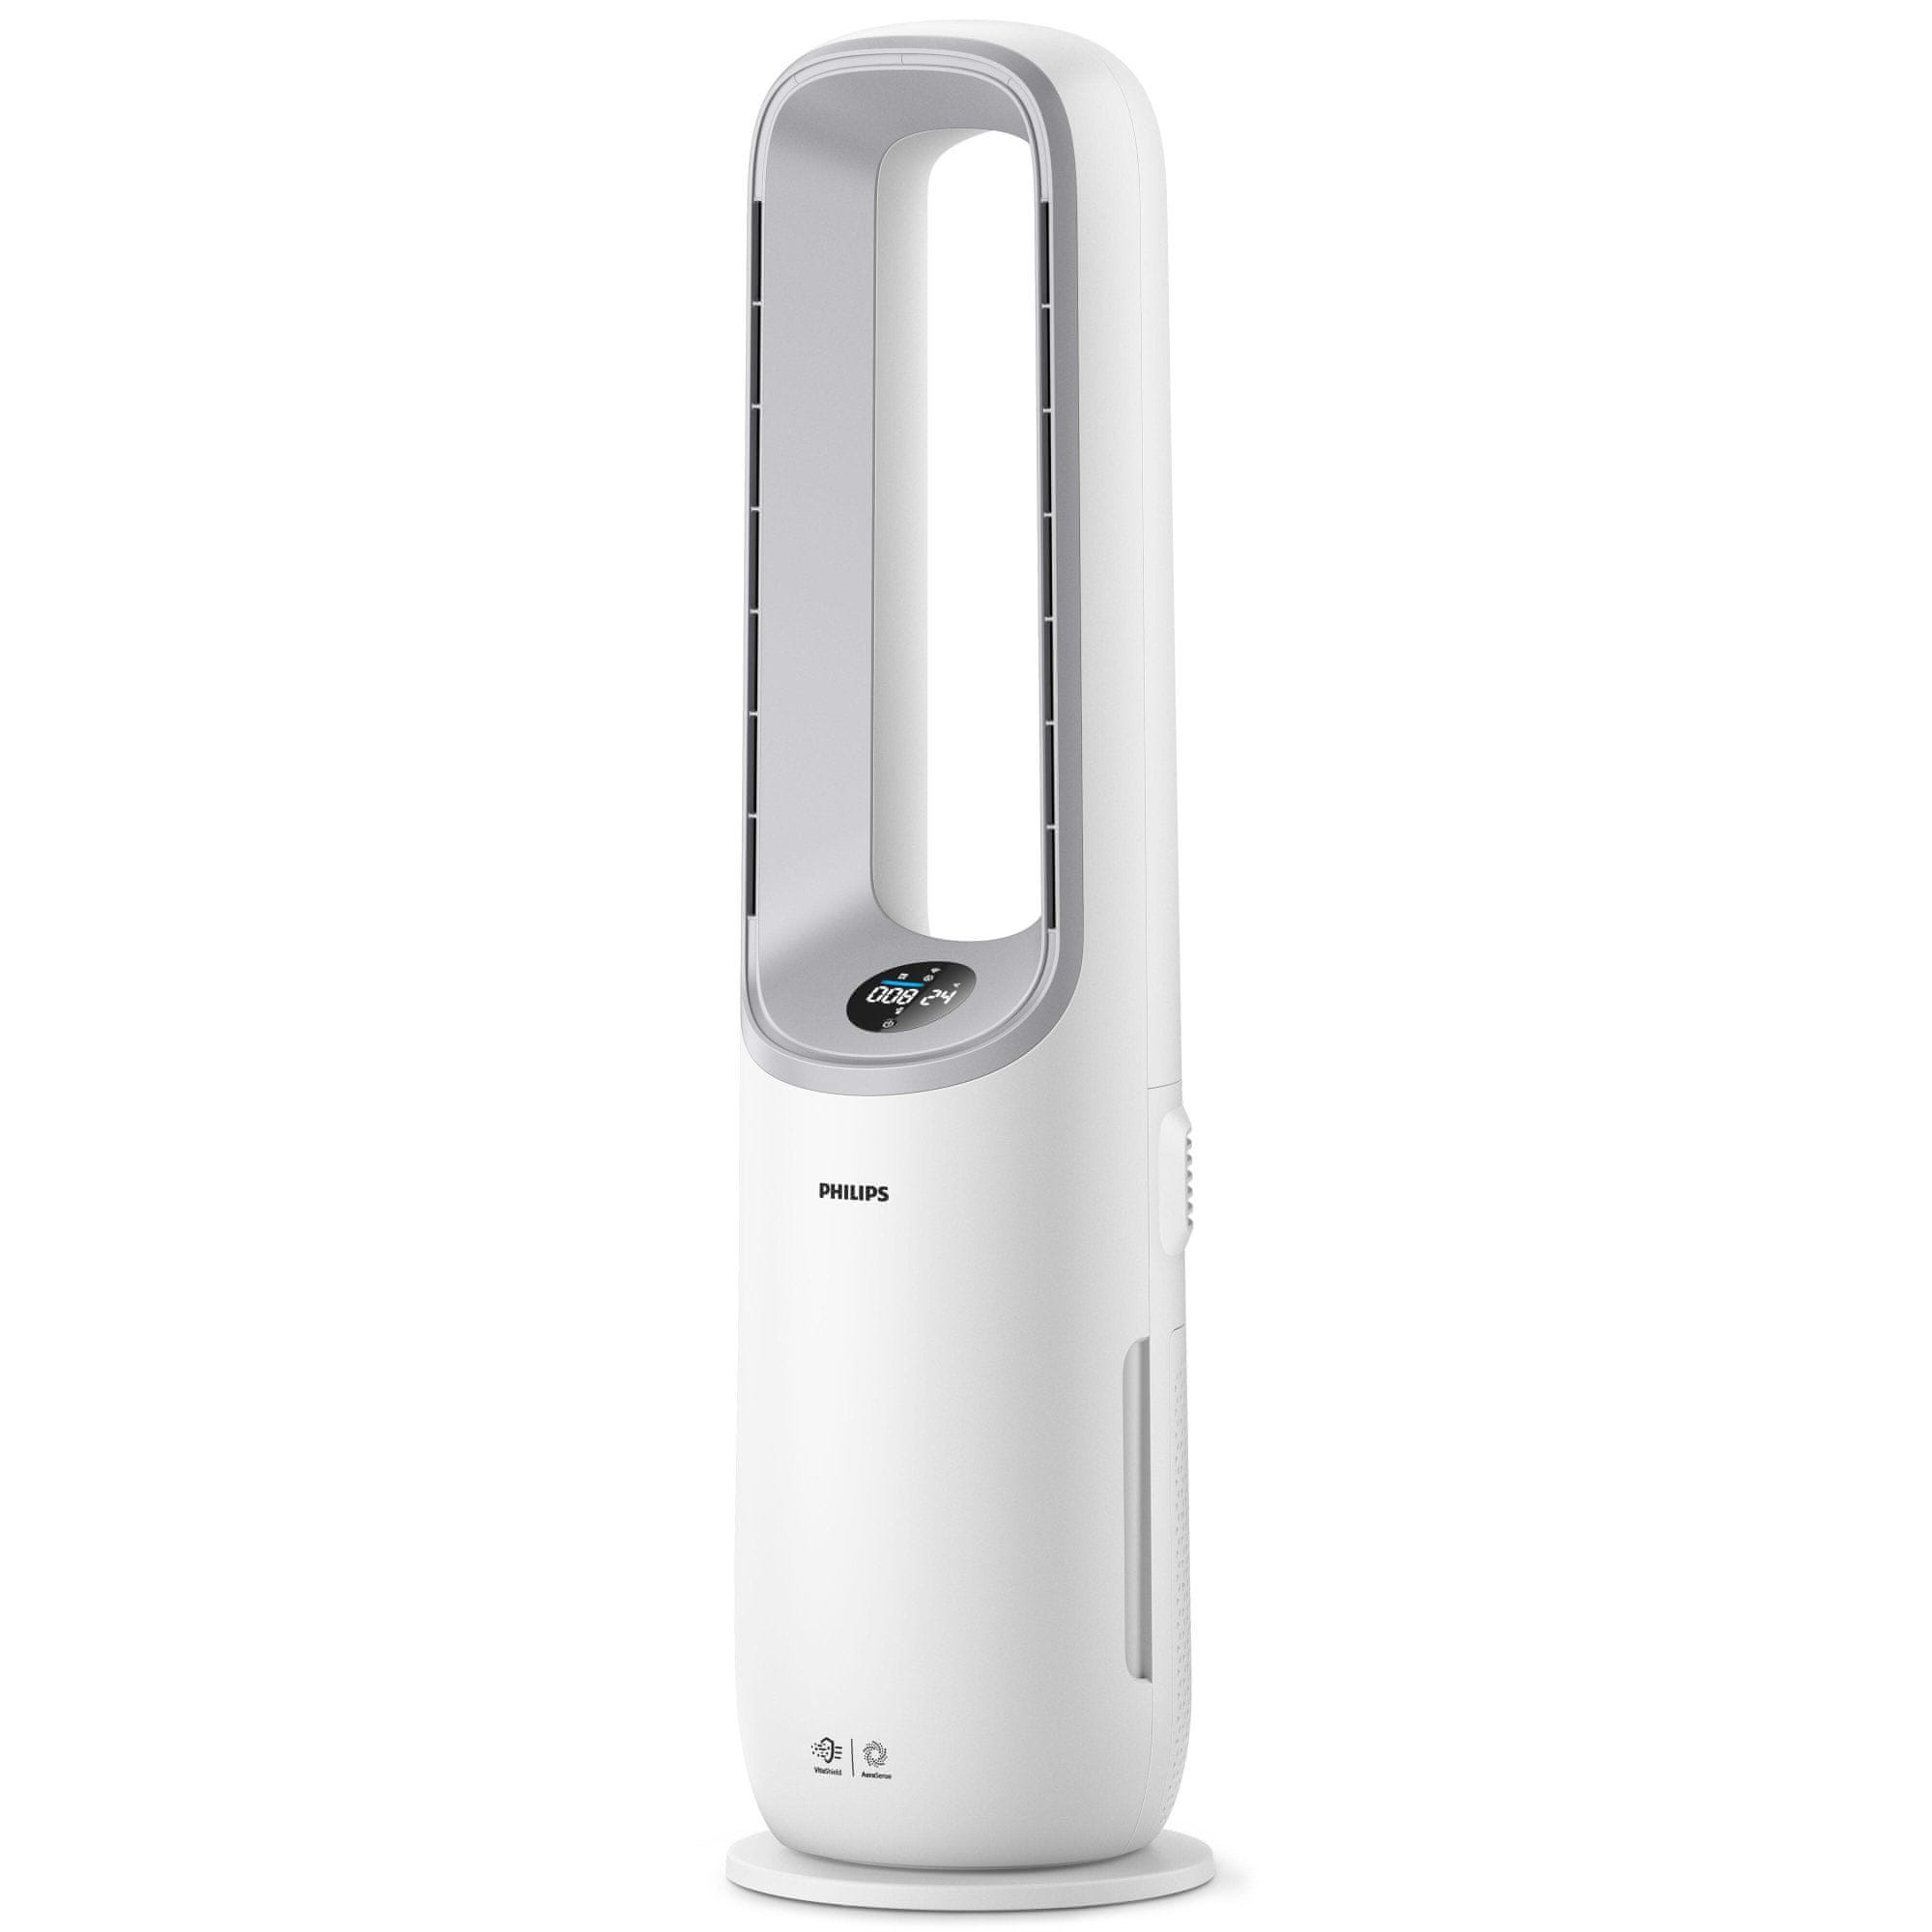     Philips Series 7000 Air Performer 2v1 AMF765/10